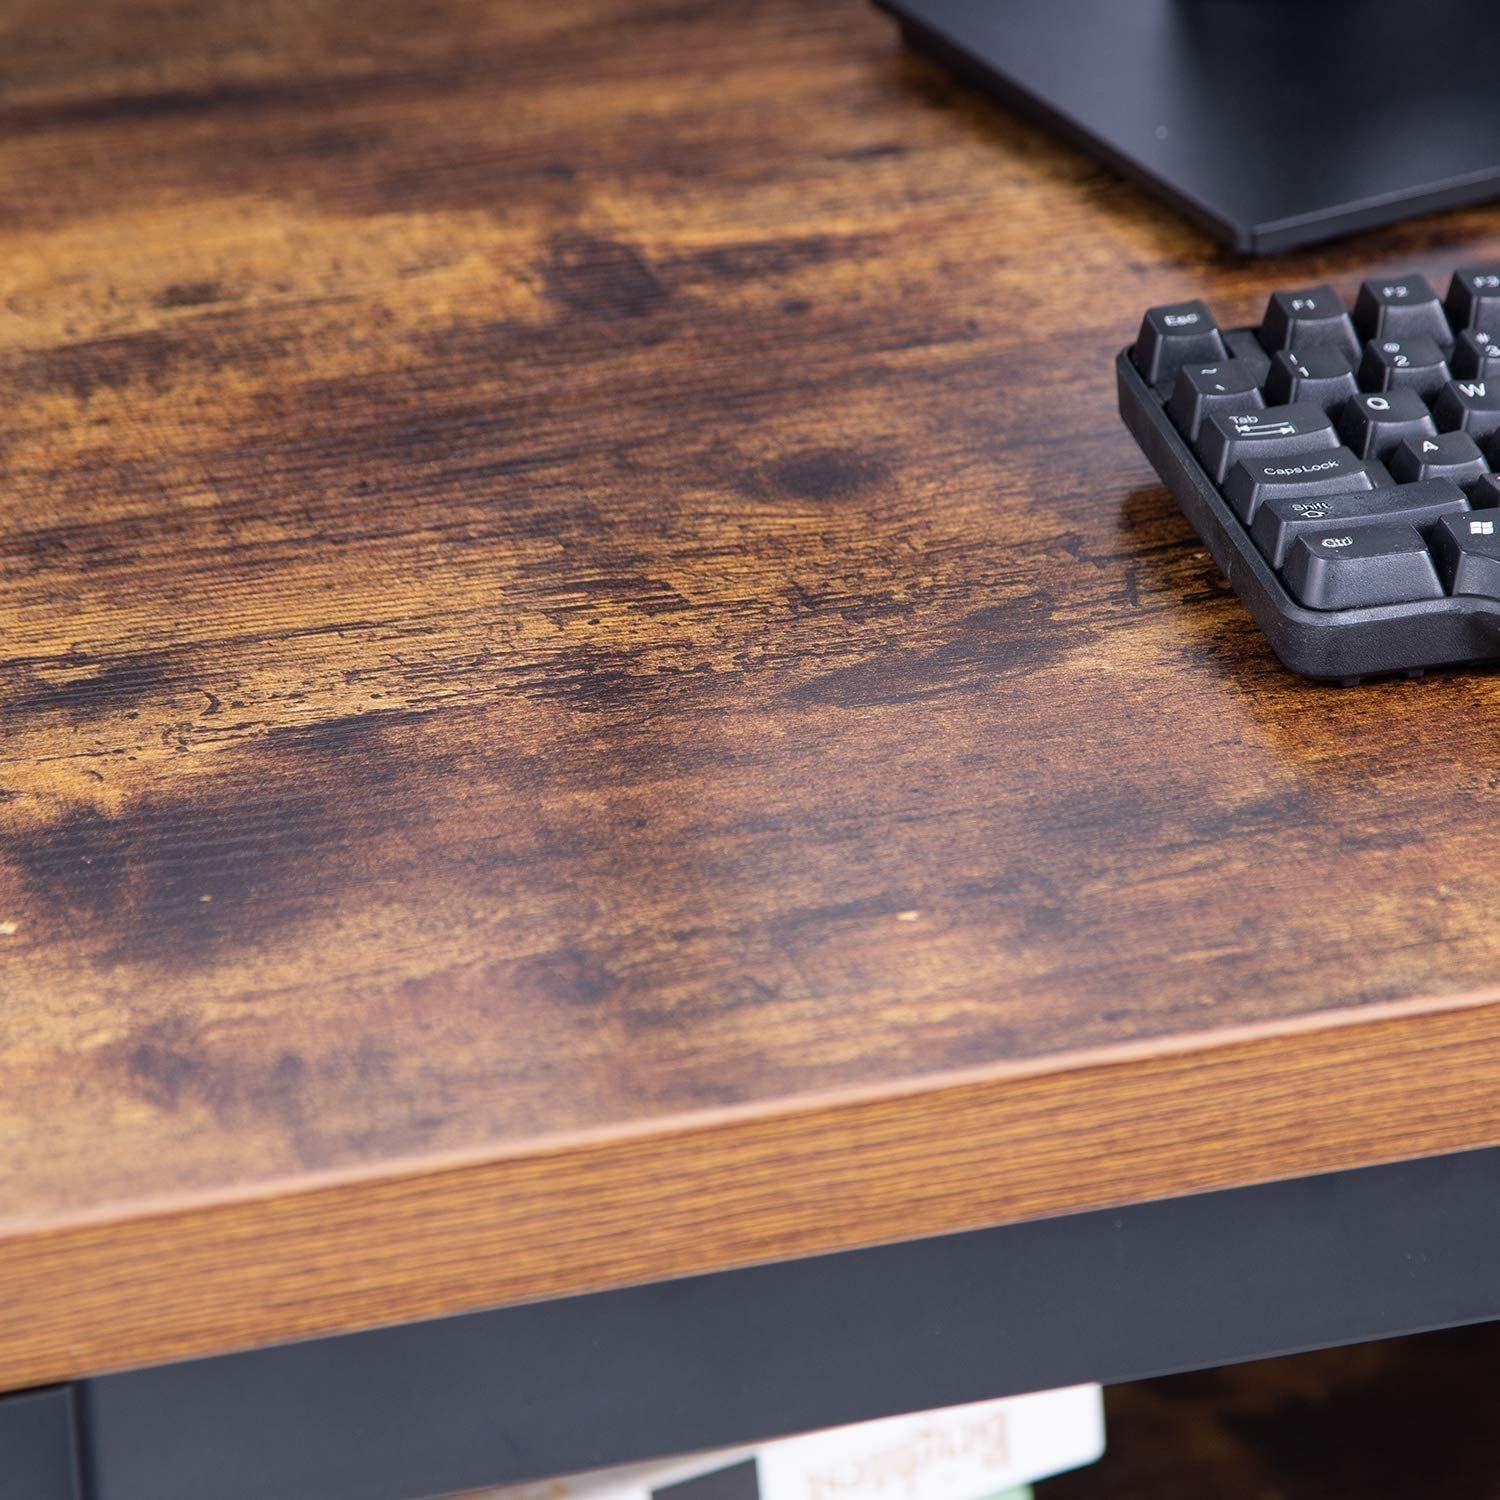 the rustic, wooden surface of hte topsky computer desk